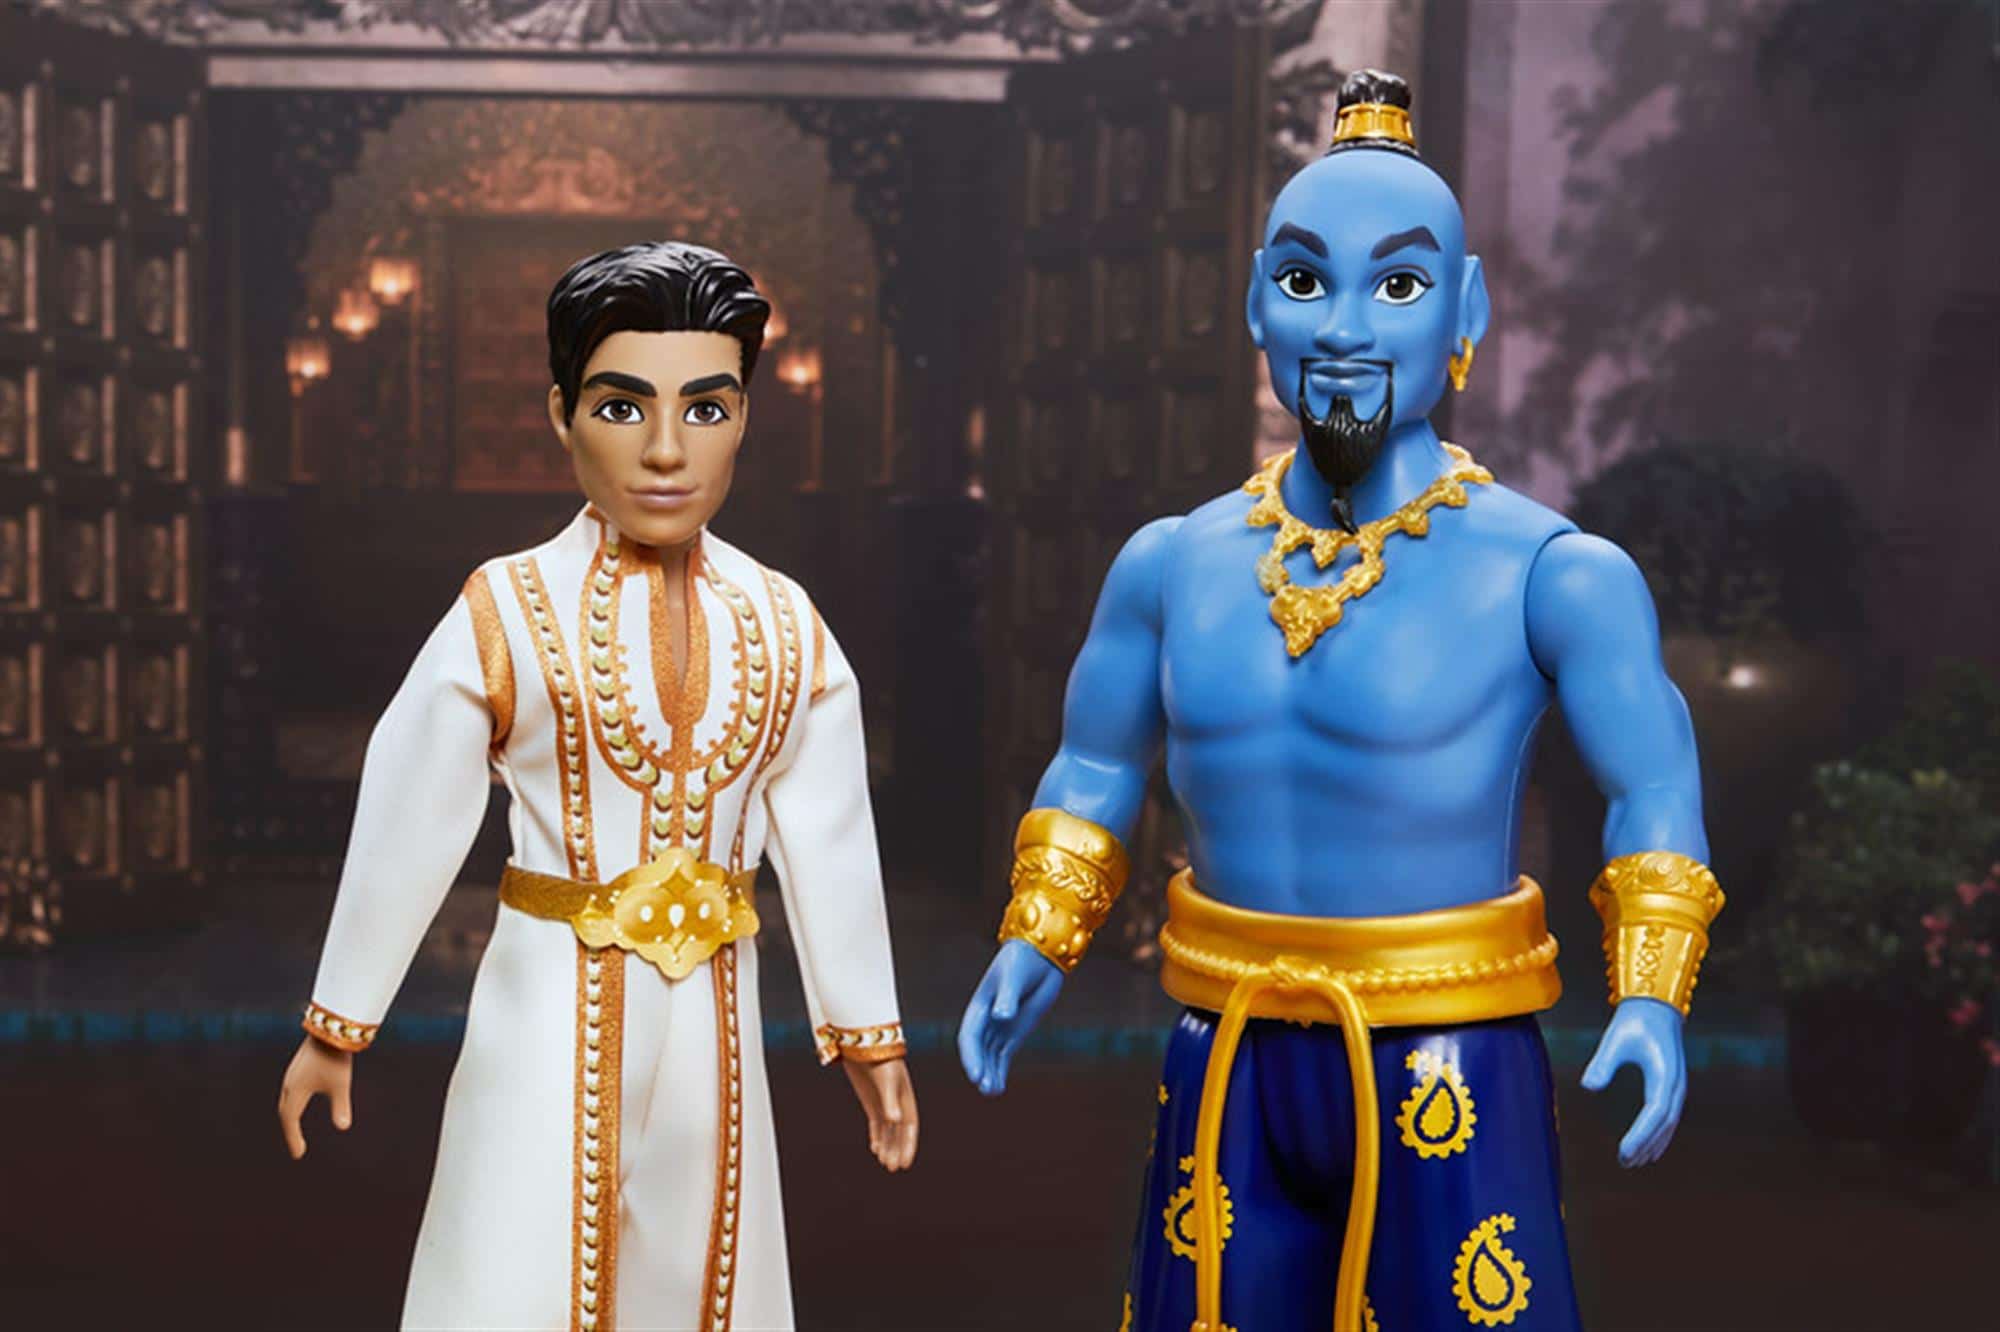 New Toy Images Reveal Will Smith’s Full Genie Costume In Aladdin